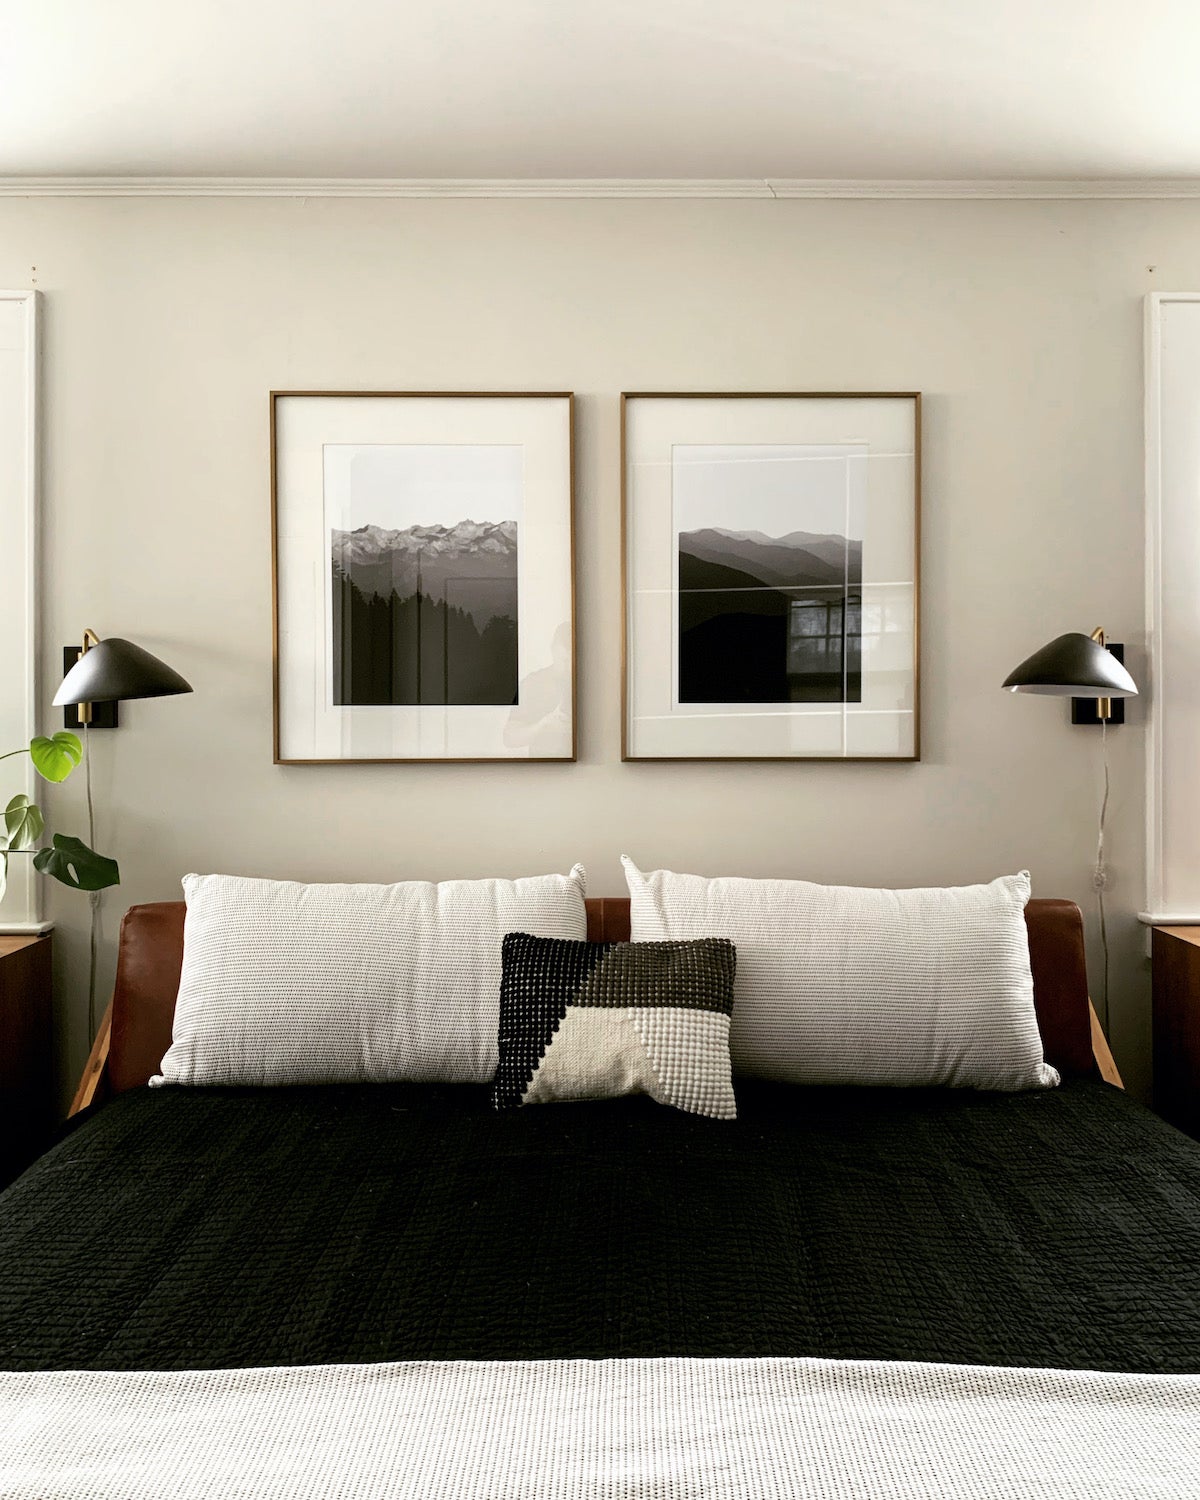 Two framed Artifact Uprising Large Format prints hung above bed featuring black-and-white images of mountainscapes